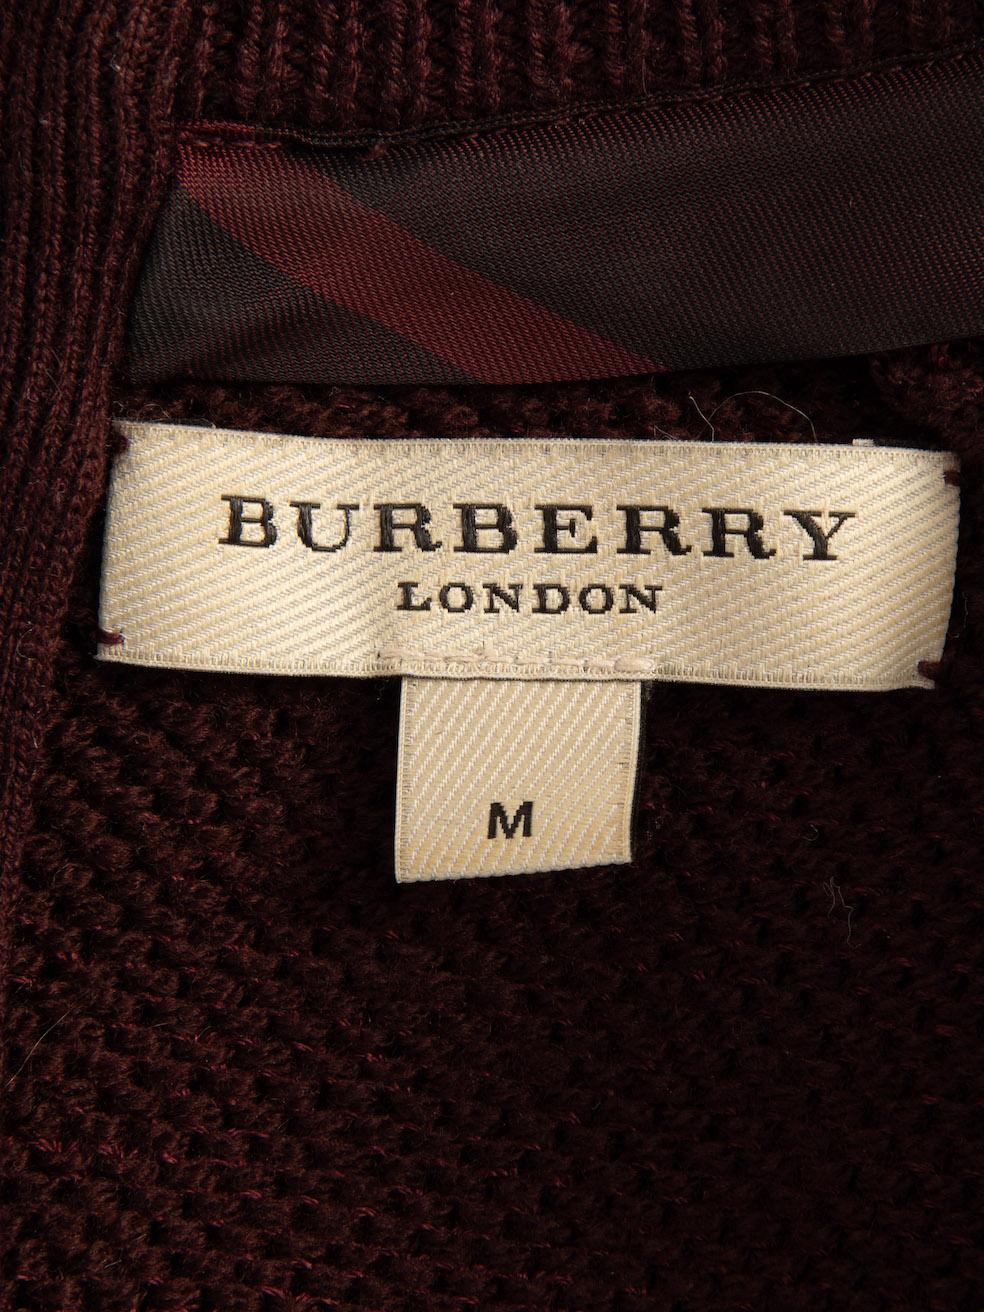 Pre-Loved Burberry Women's Burgundy Knitted Jumper Peplum Hem In Excellent Condition For Sale In London, GB